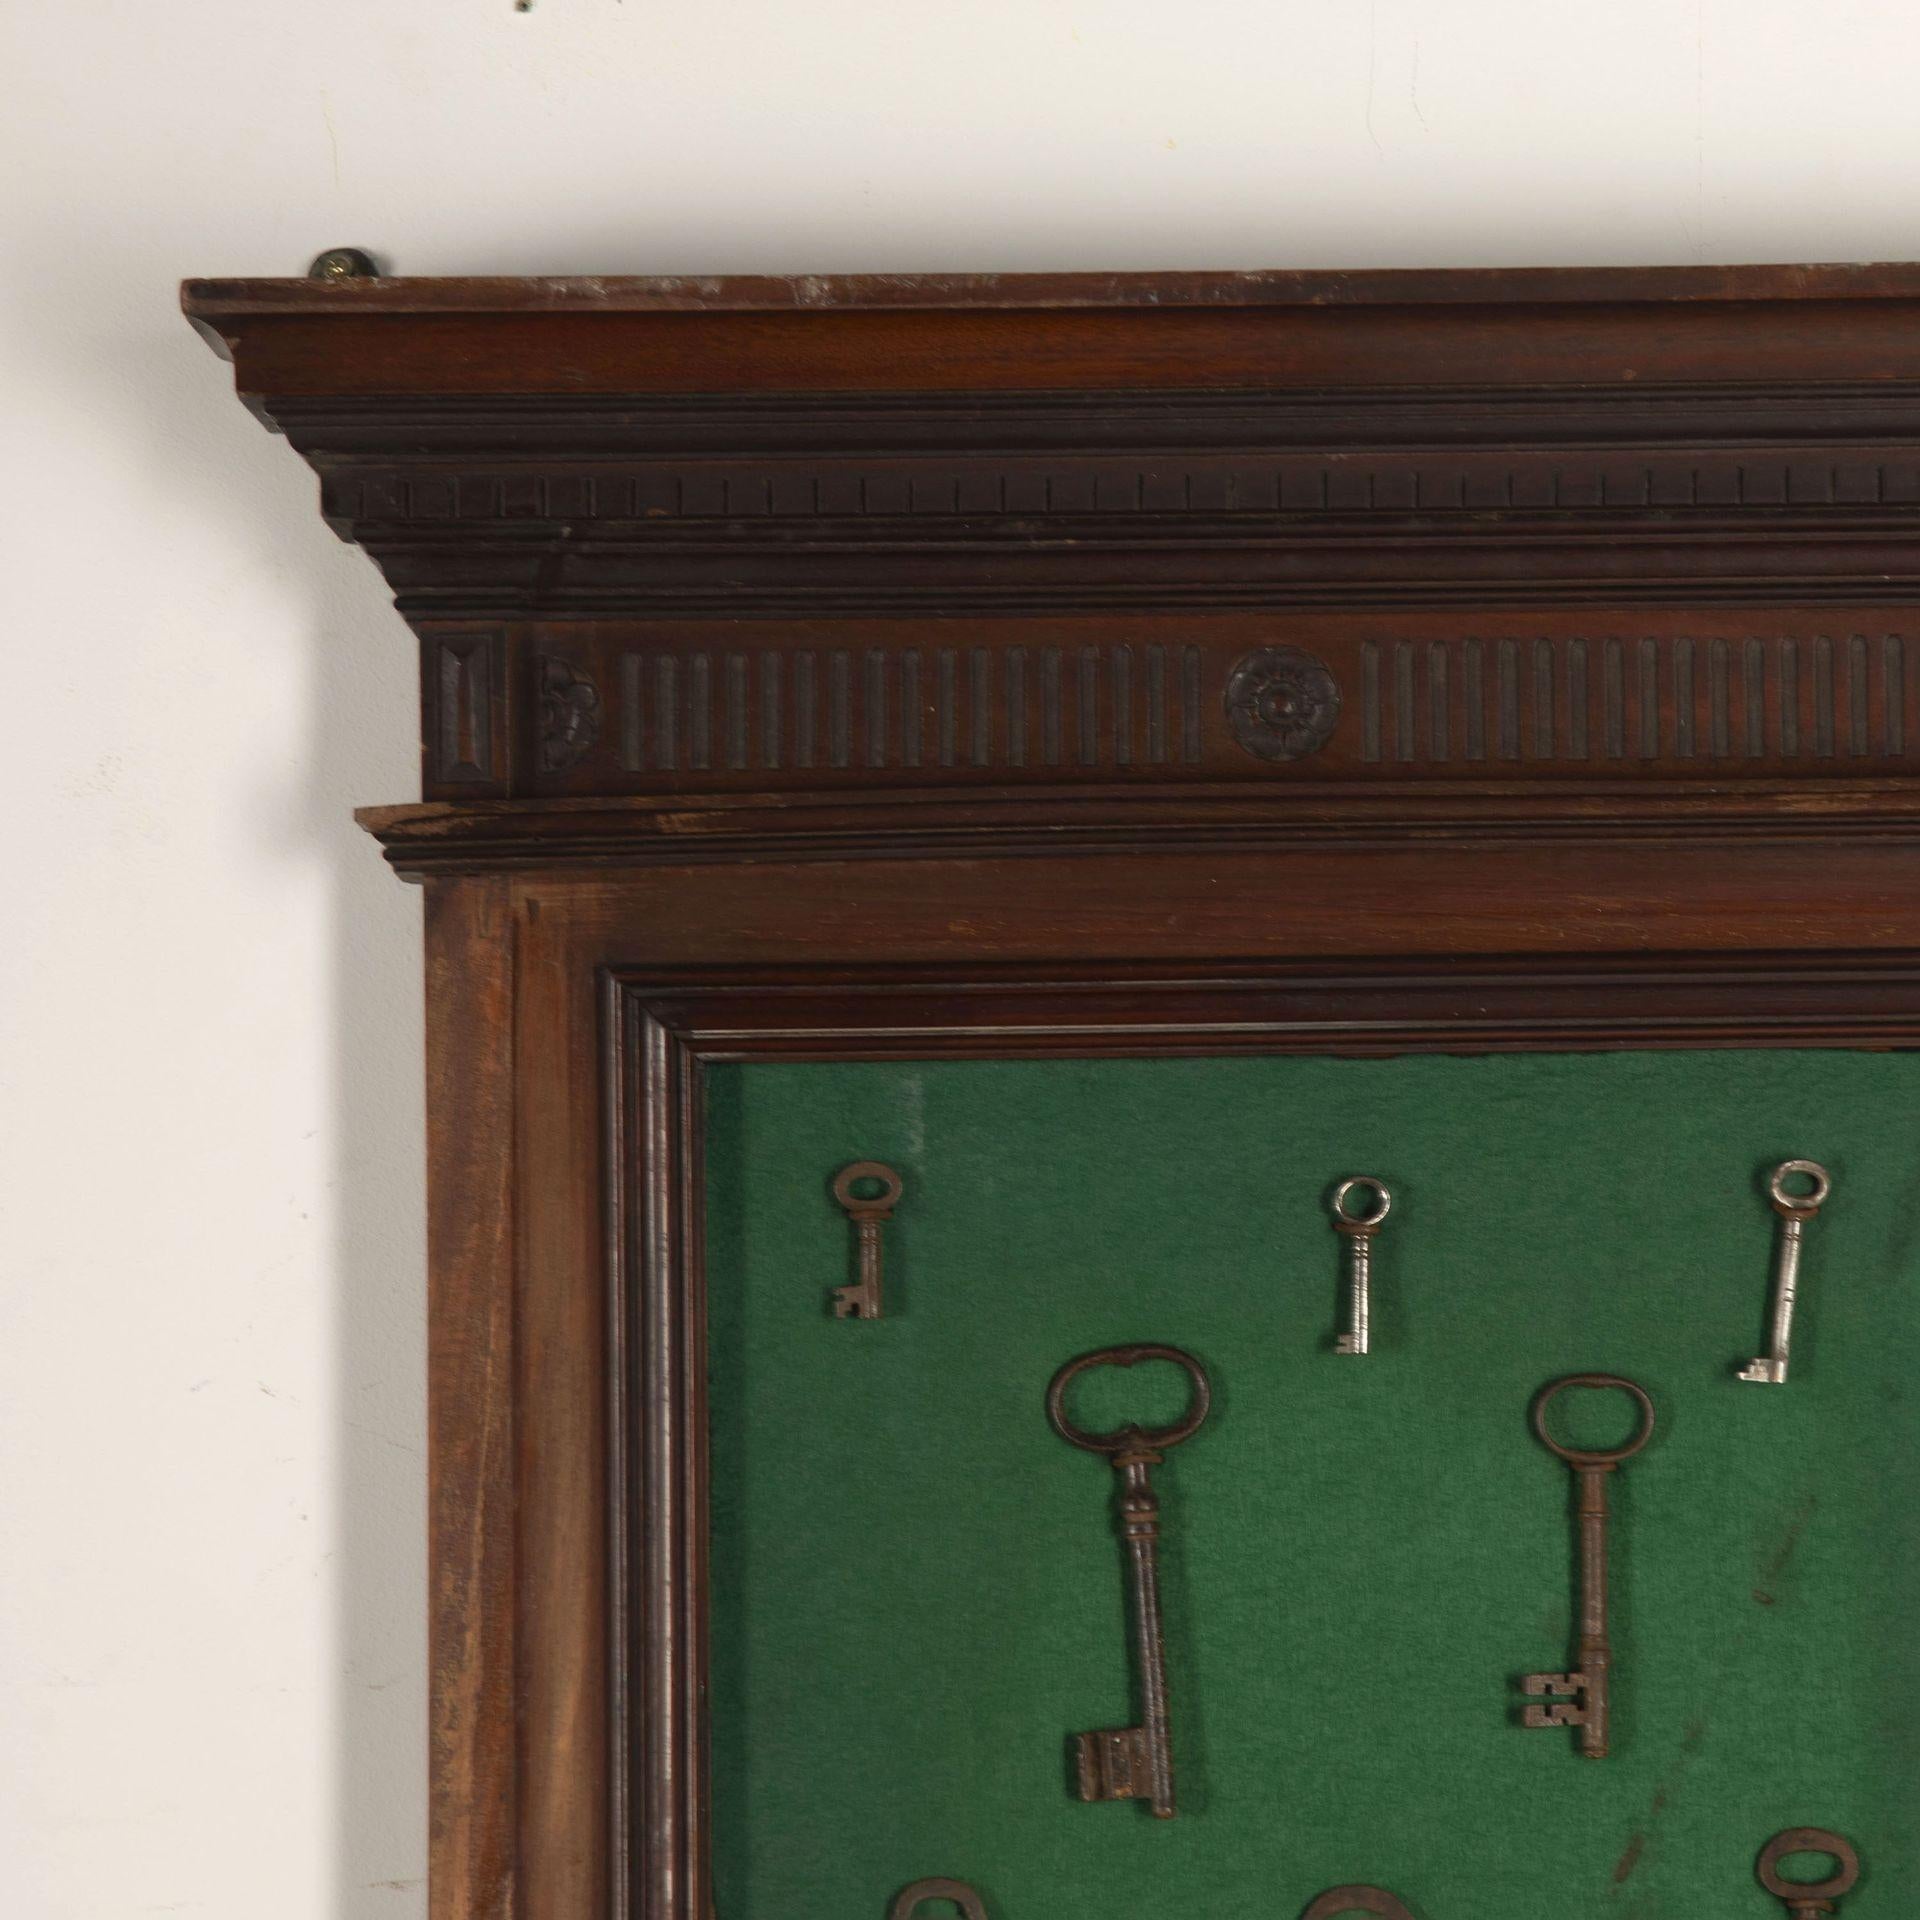 19th century collection of metal keys presented in a green felt lined mahogany case.